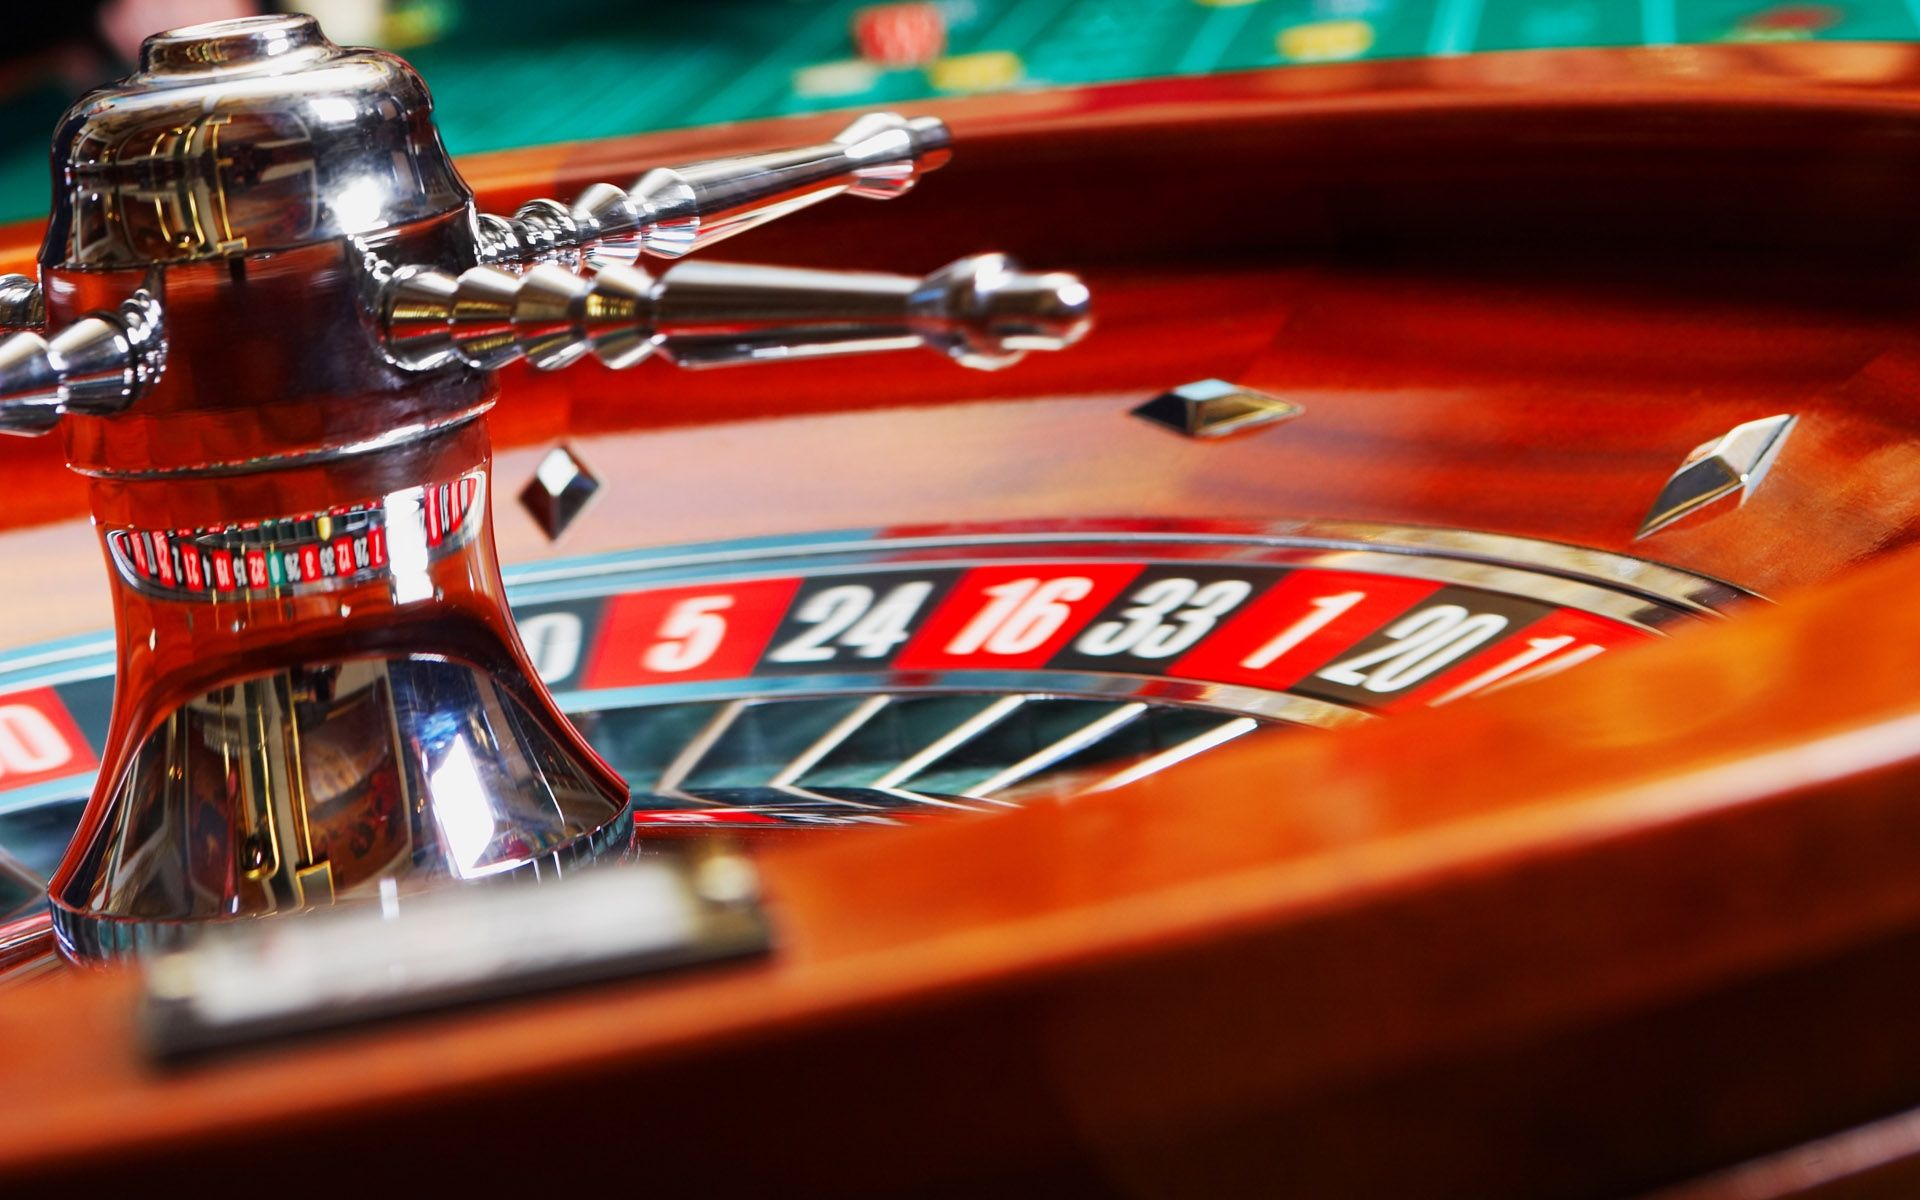 The games of a casino online allow you to win money safely